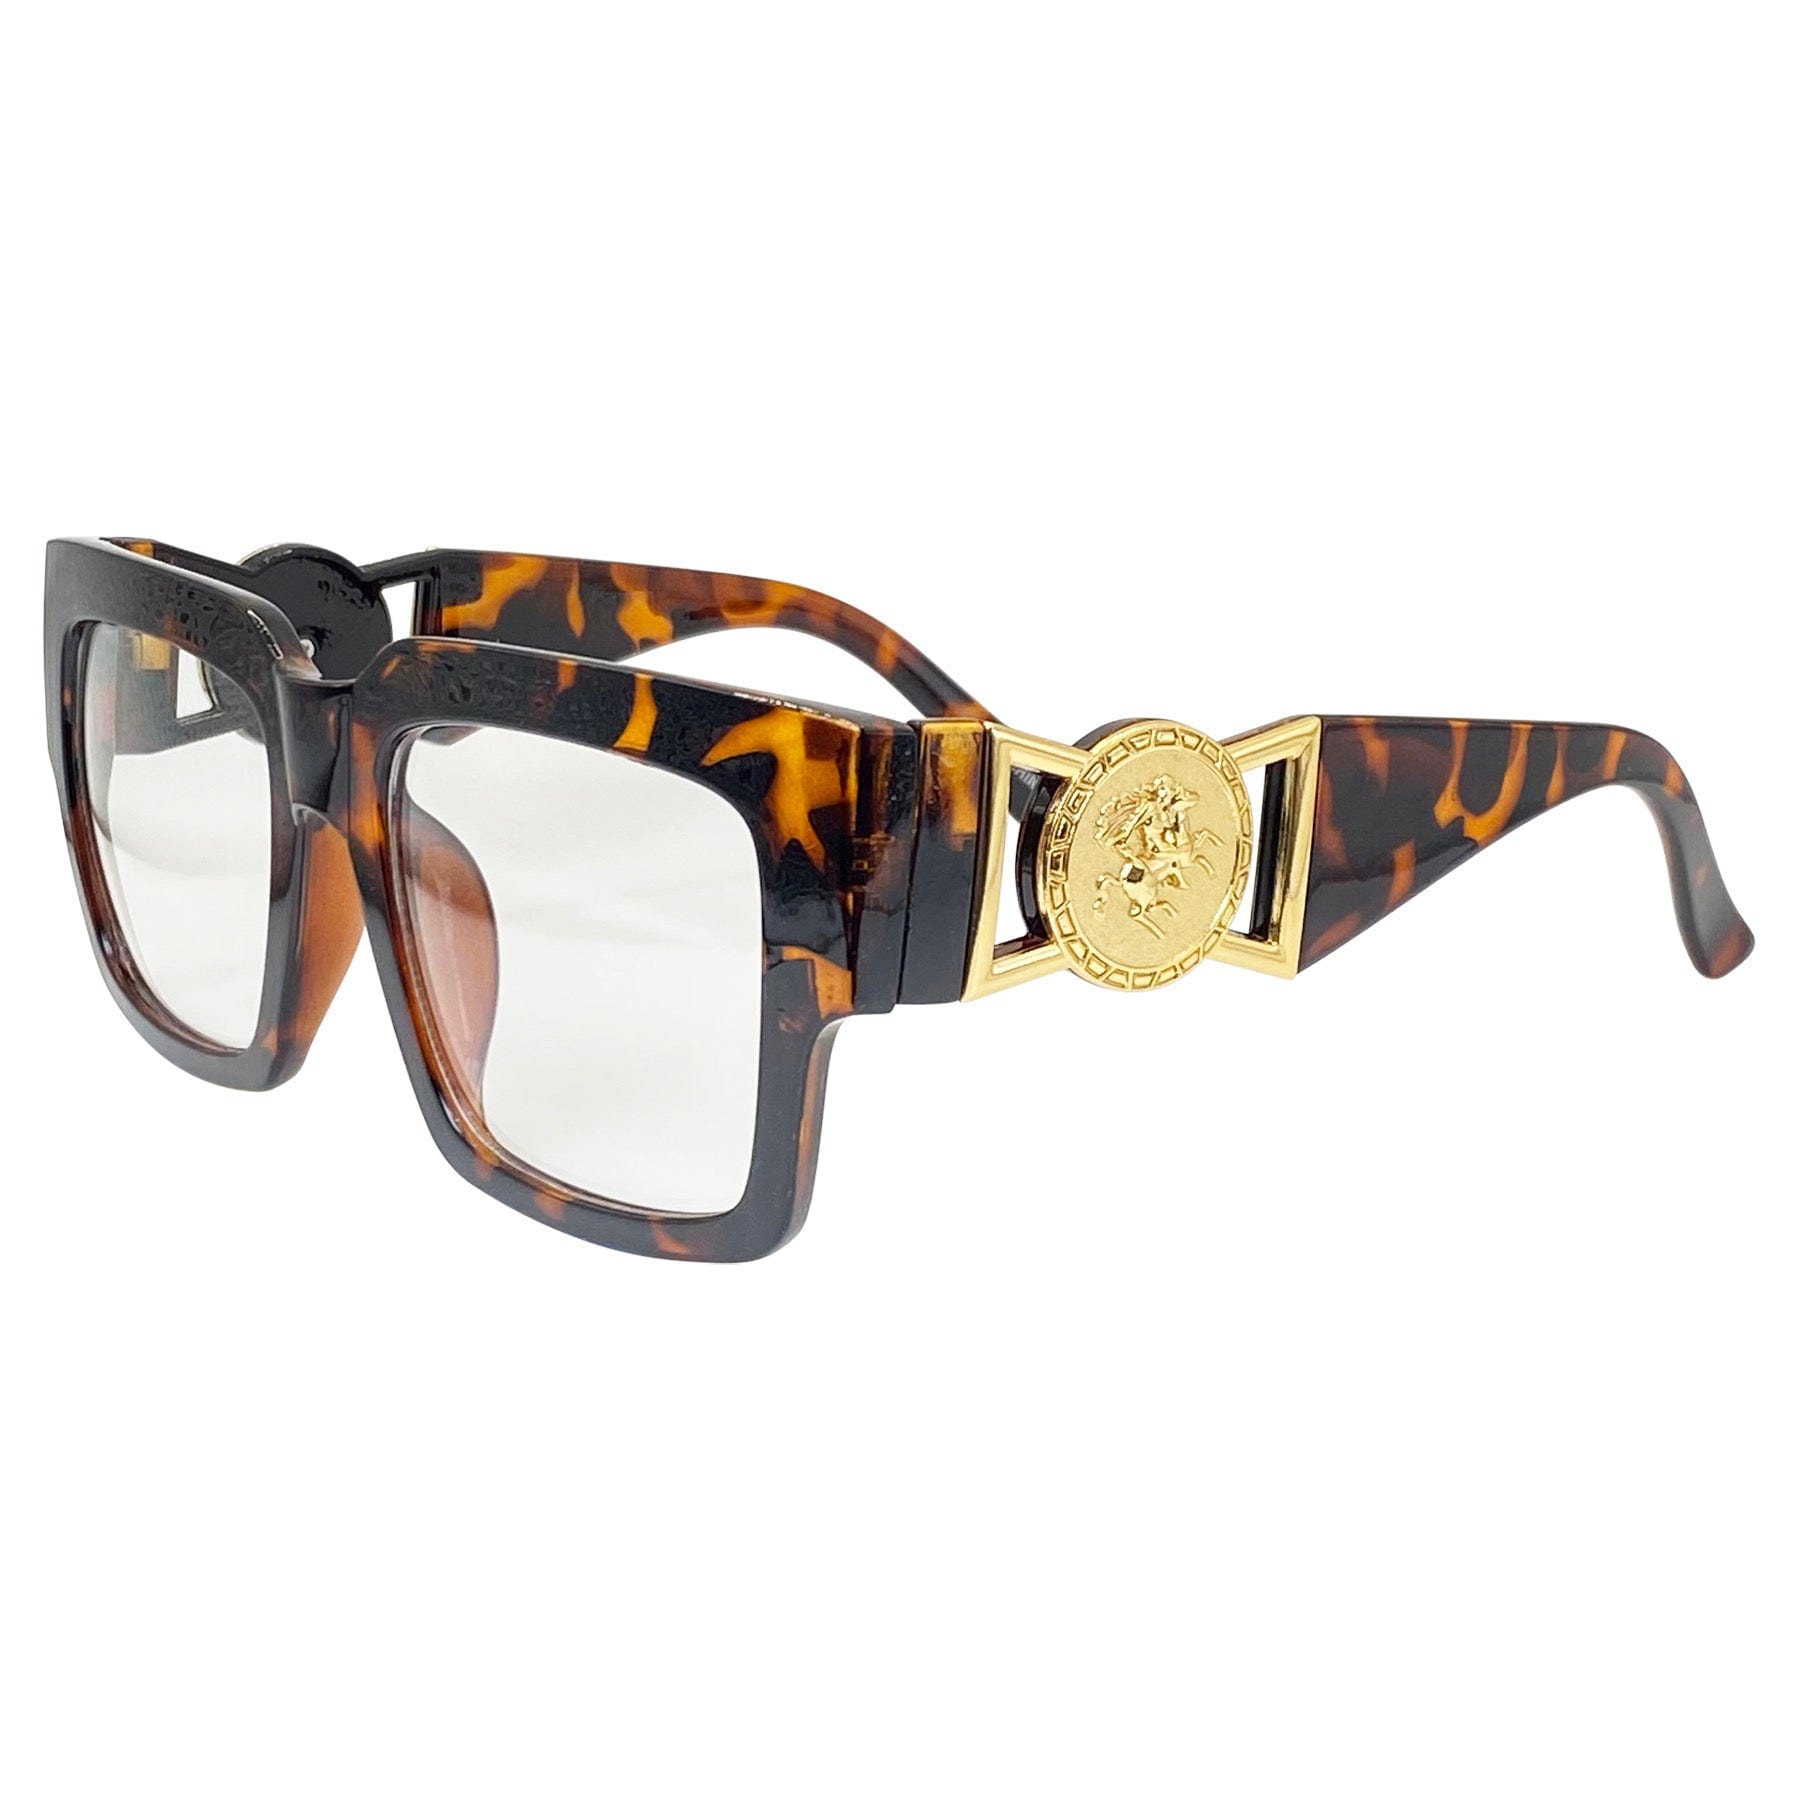 tortoise colored glasses with a gold temple embellishment and clear lens